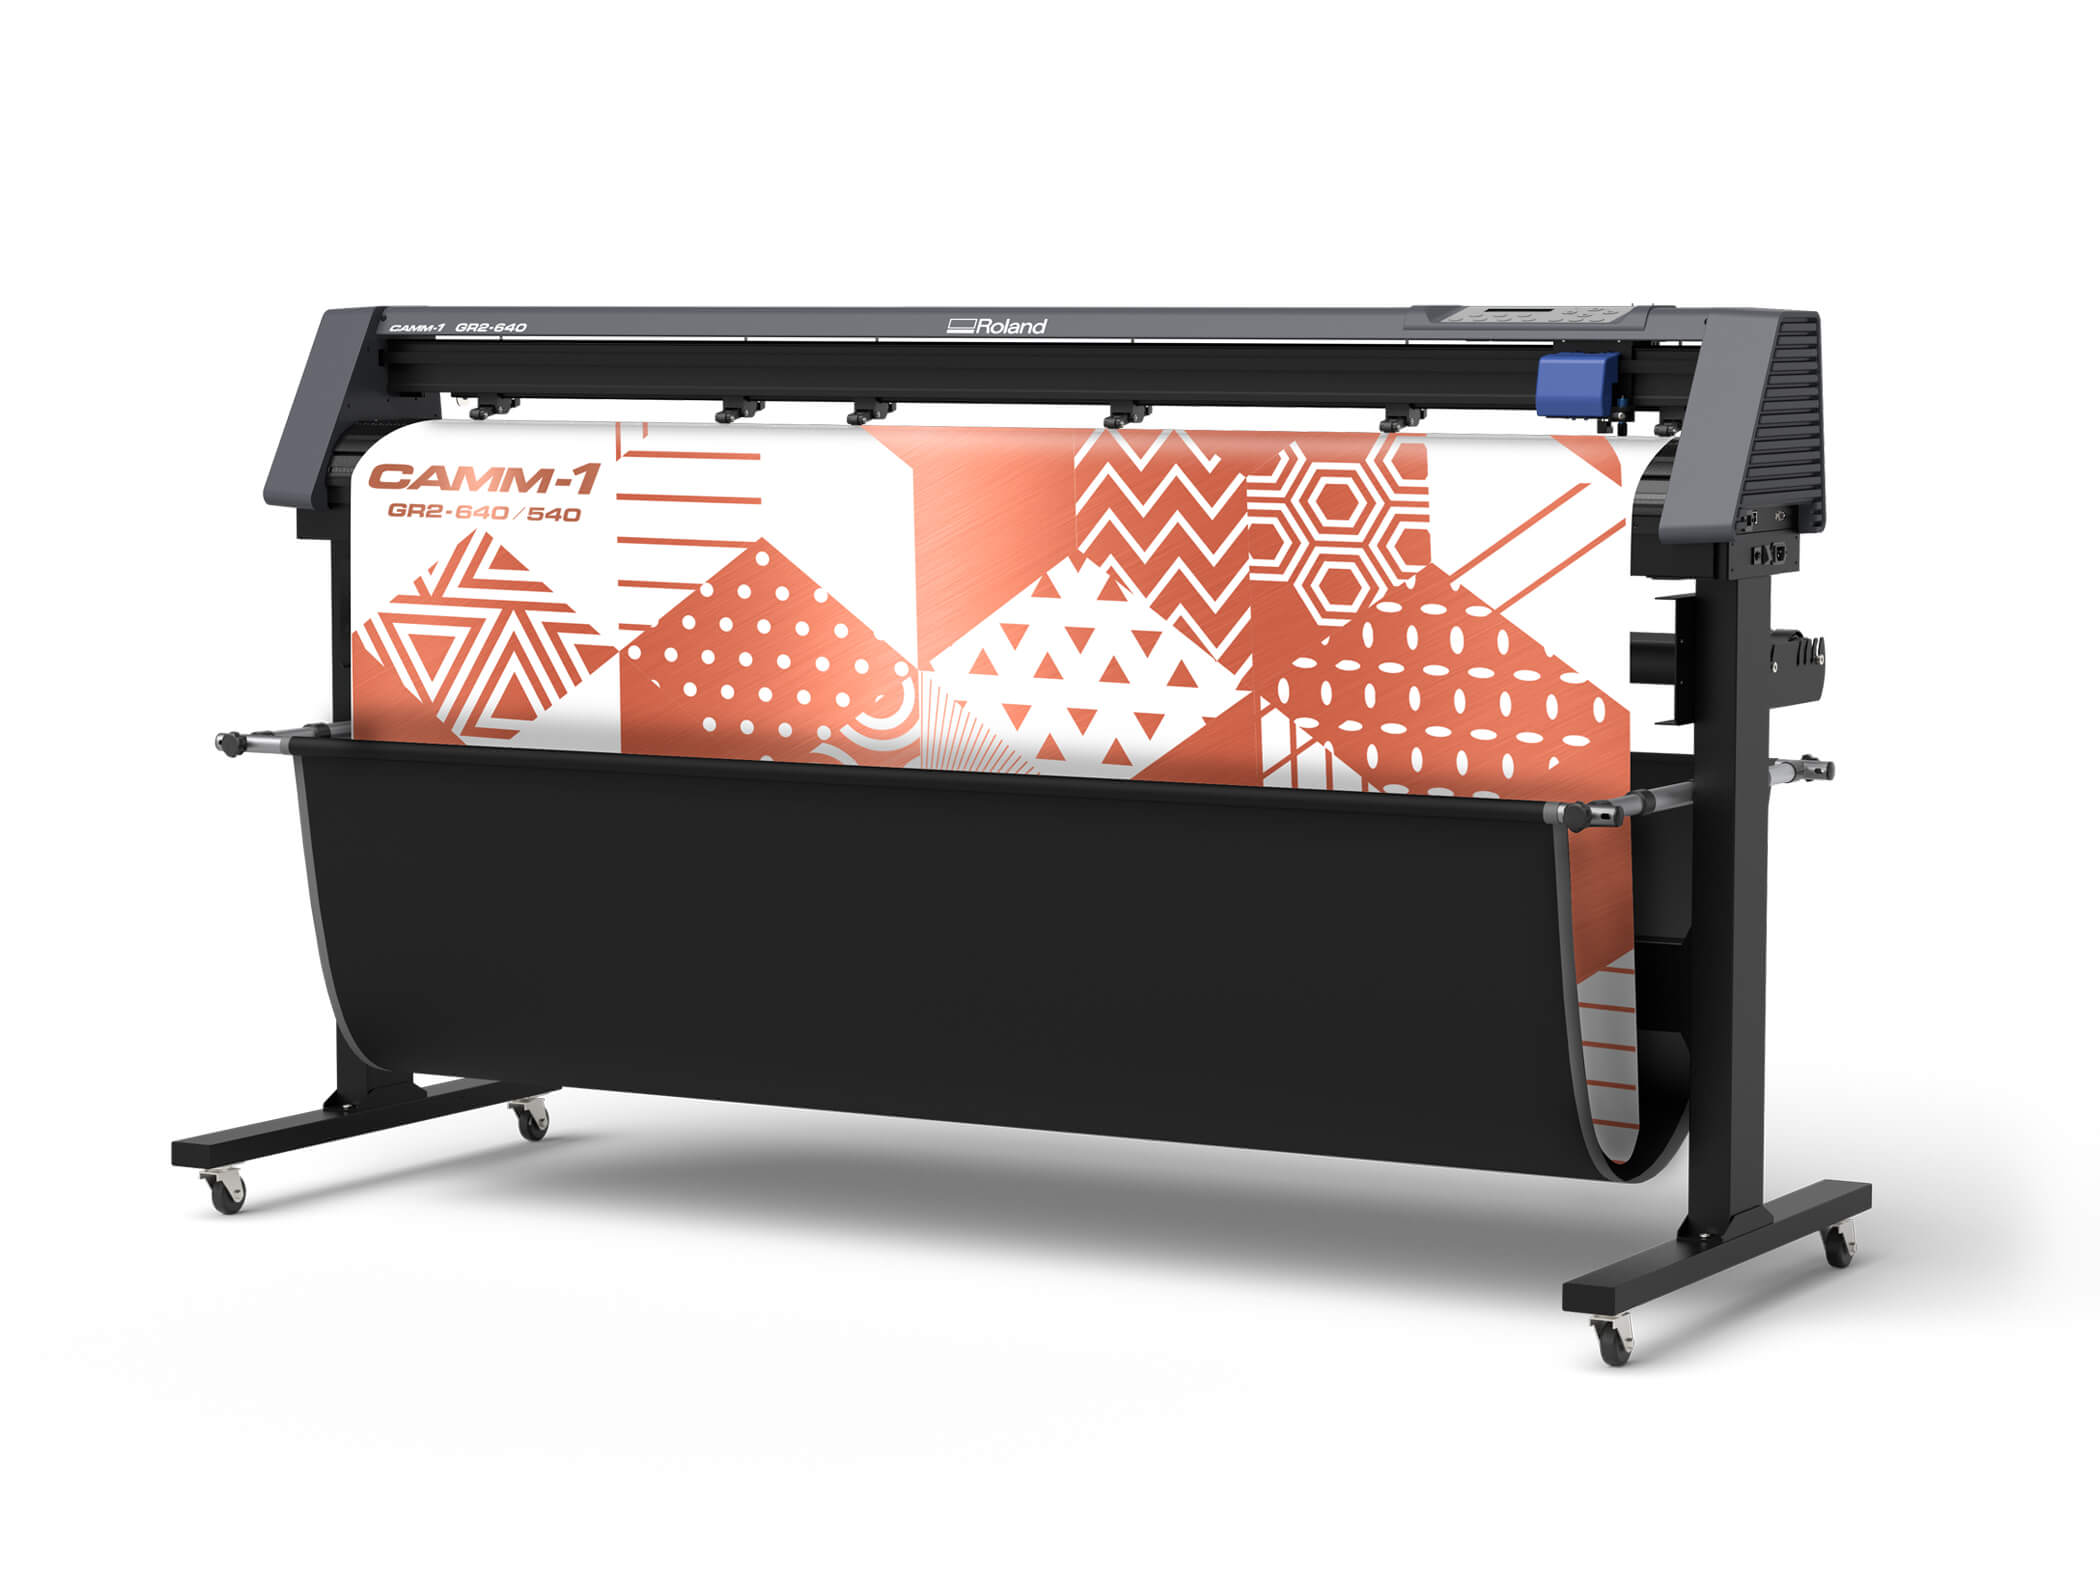 Roland DG's newly launched CAMM-1 GR2 series large-format vinyl cutters.